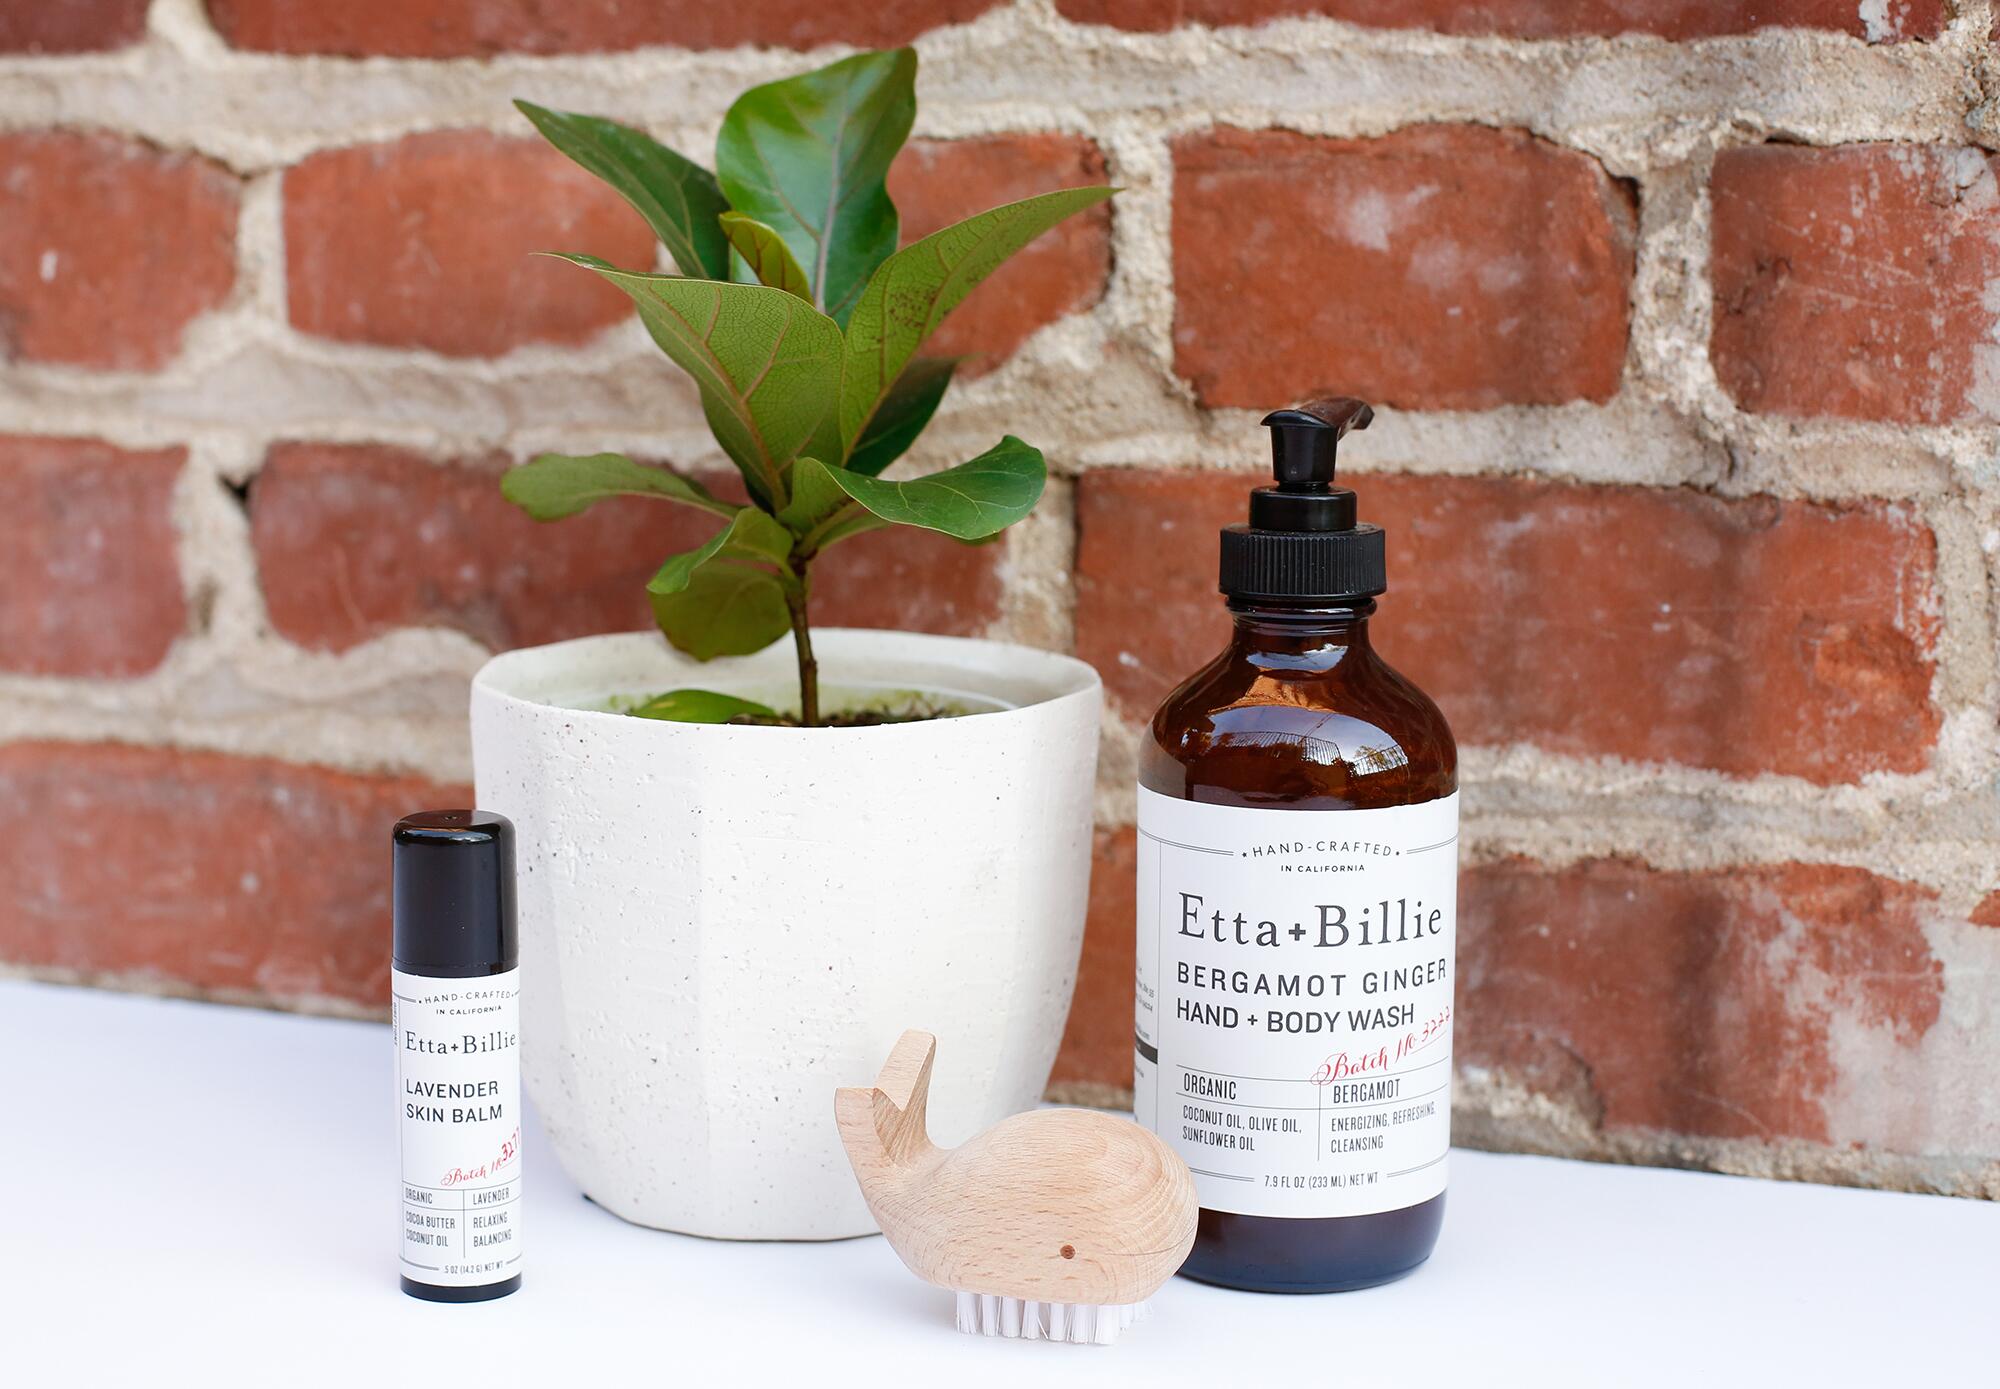 Hand Care Kit (cause plant lovers really need to show their hands some love) from Folia Collection.